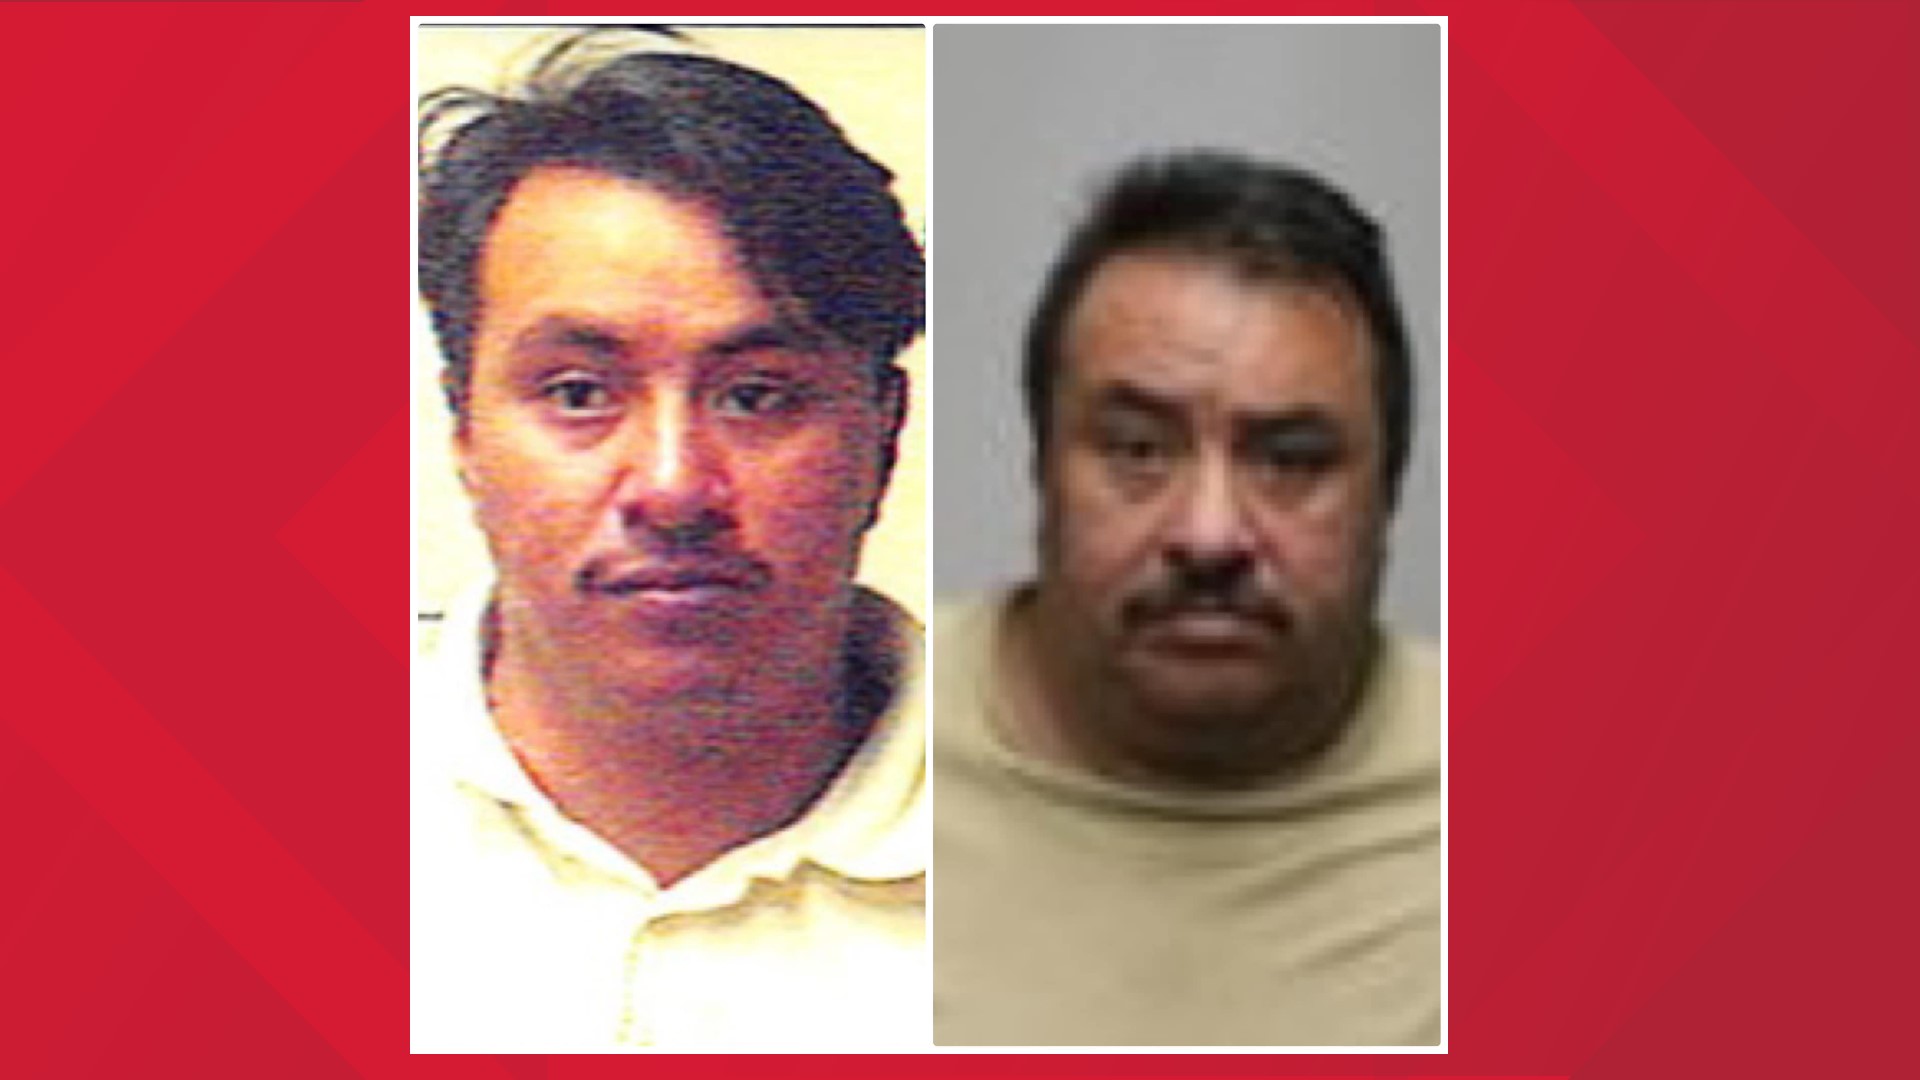 Investigators obtained a warrant for the suspect in 1999 after he allegedly fled to Mexico following the homicide.